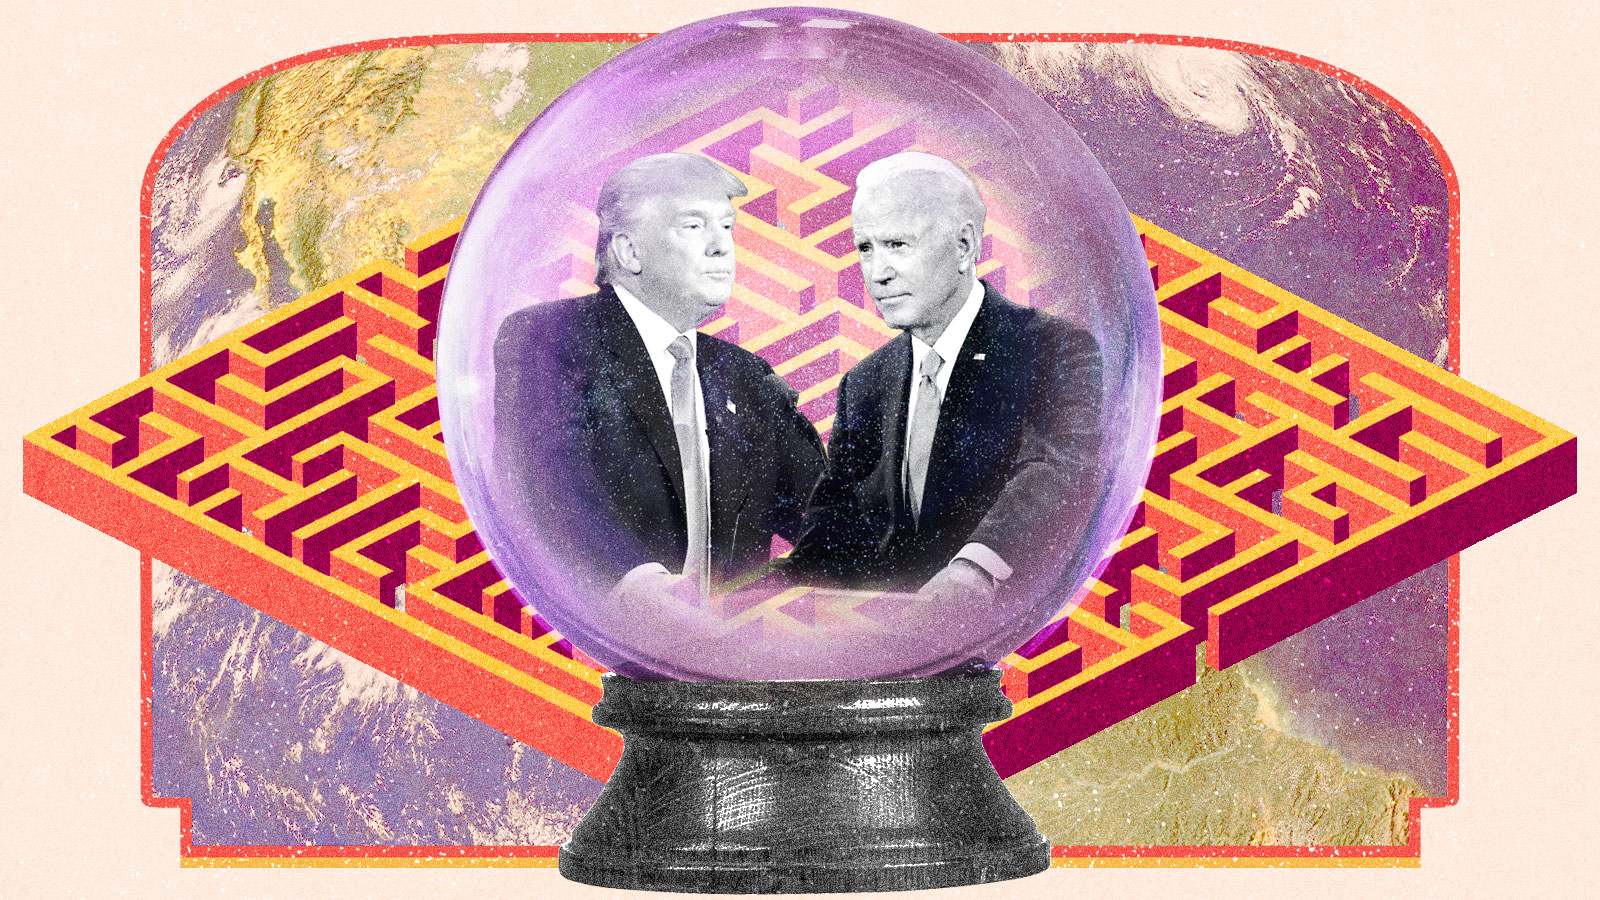 Donald Trump and Joe Biden inside a crystal ball on top of a background of a maze and an earth pattern in the style of the Choose Your Own Adventure books